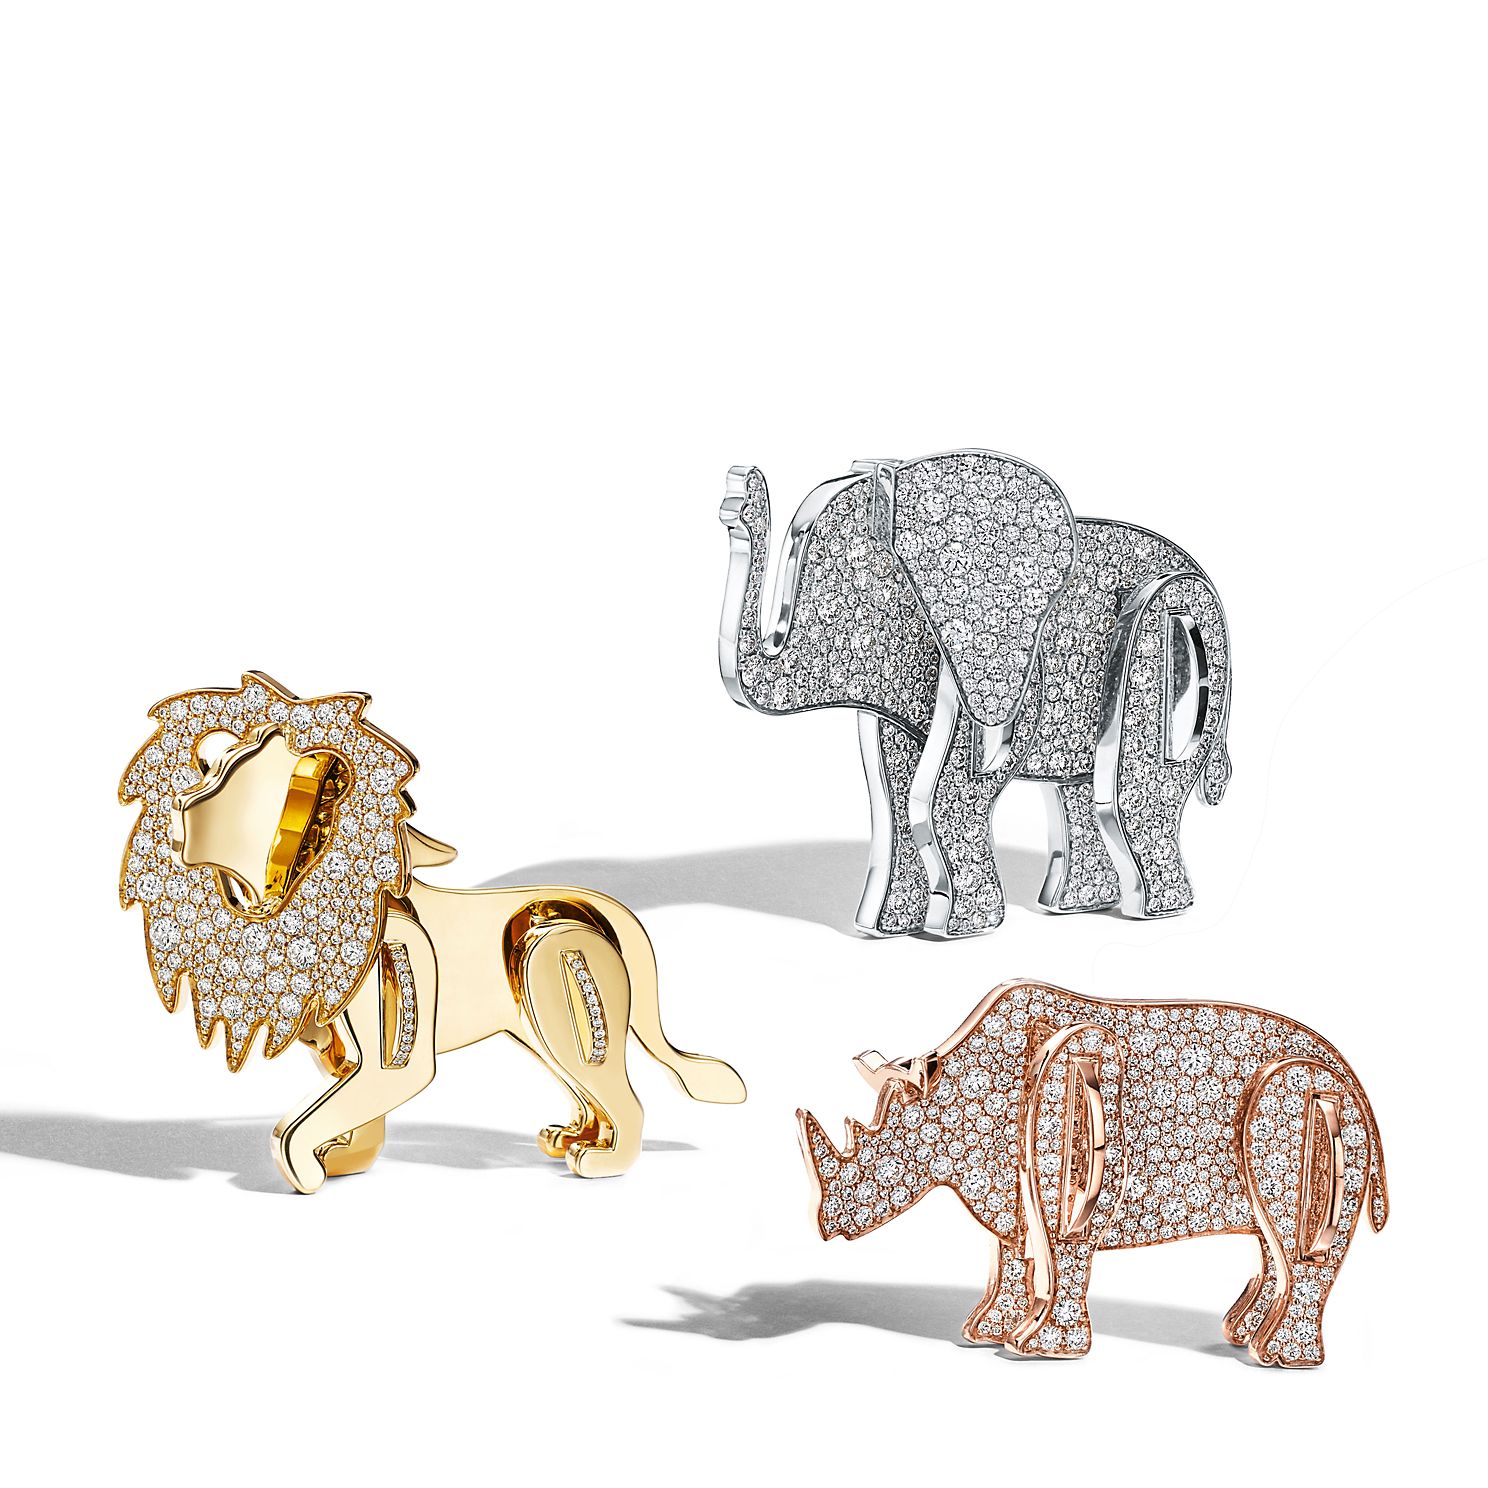 Save The Wild by Tiffany & Co.